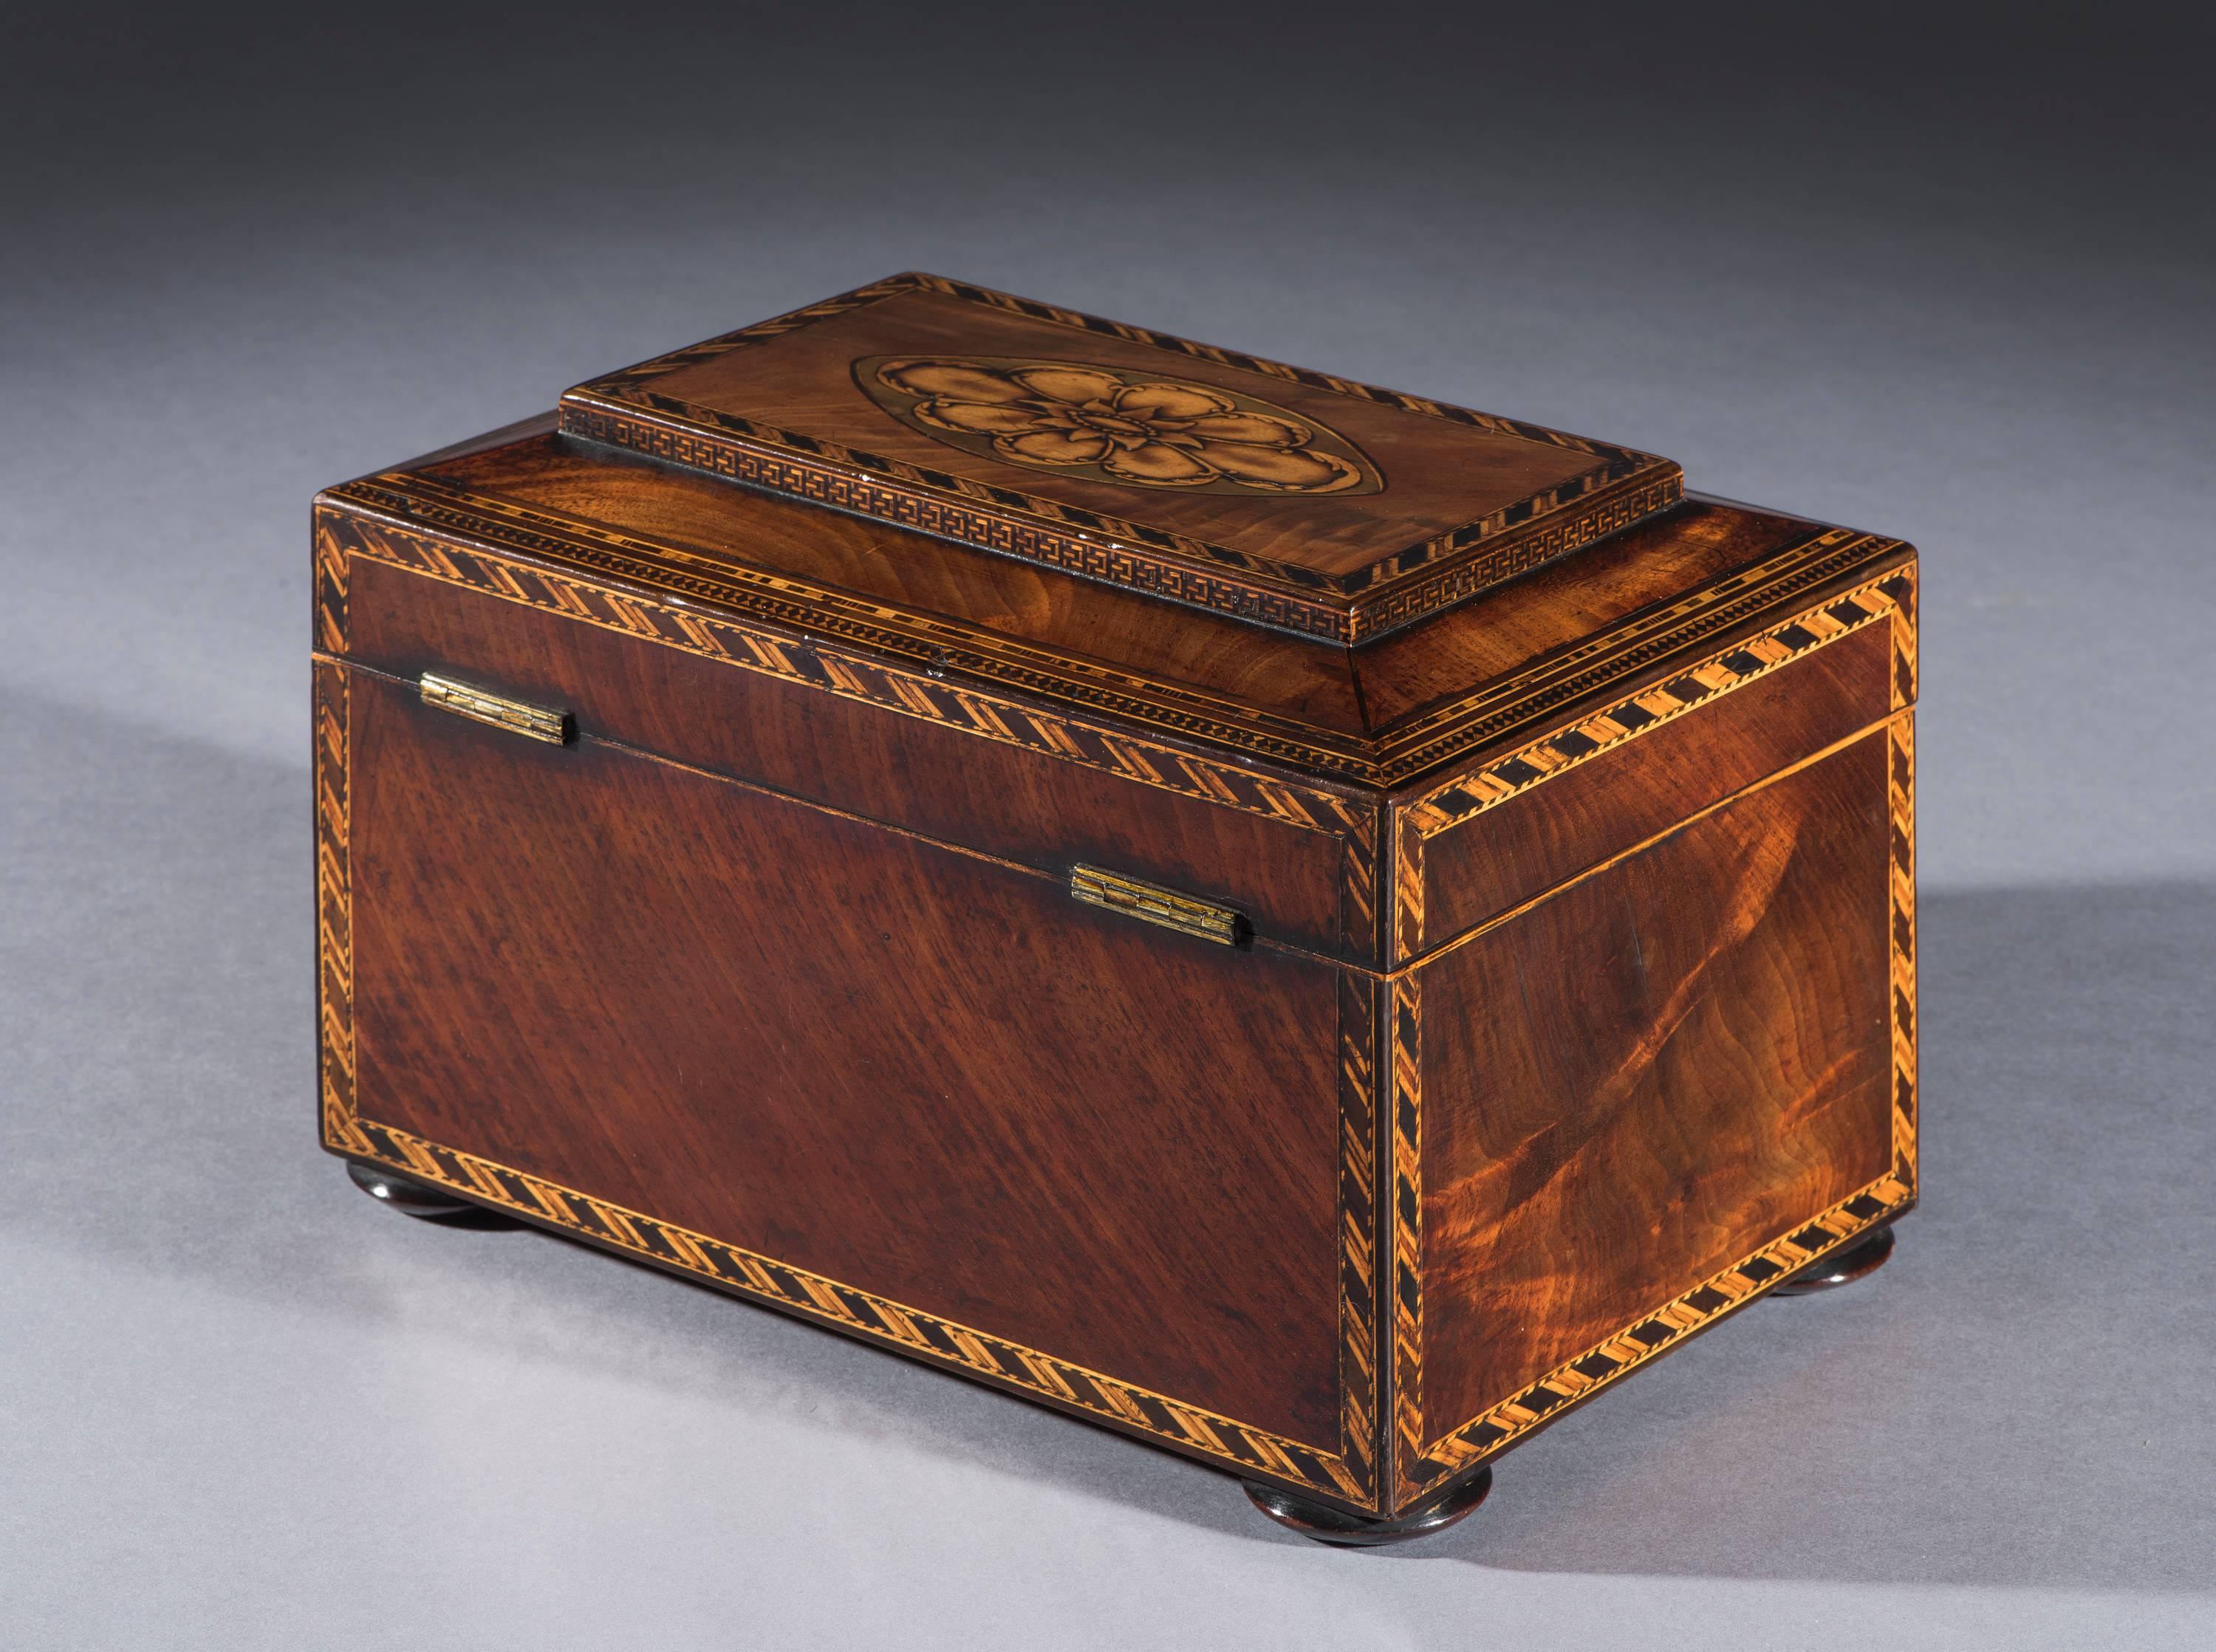 George III period flamed mahogany inlaid jewellery box.
The jewellery box has an inset mahogany tray and the original lining. It is fitted with an ivory lozenge-shaped escutcheon with the key and has gilt brass stop-lock hinges. The box stands on